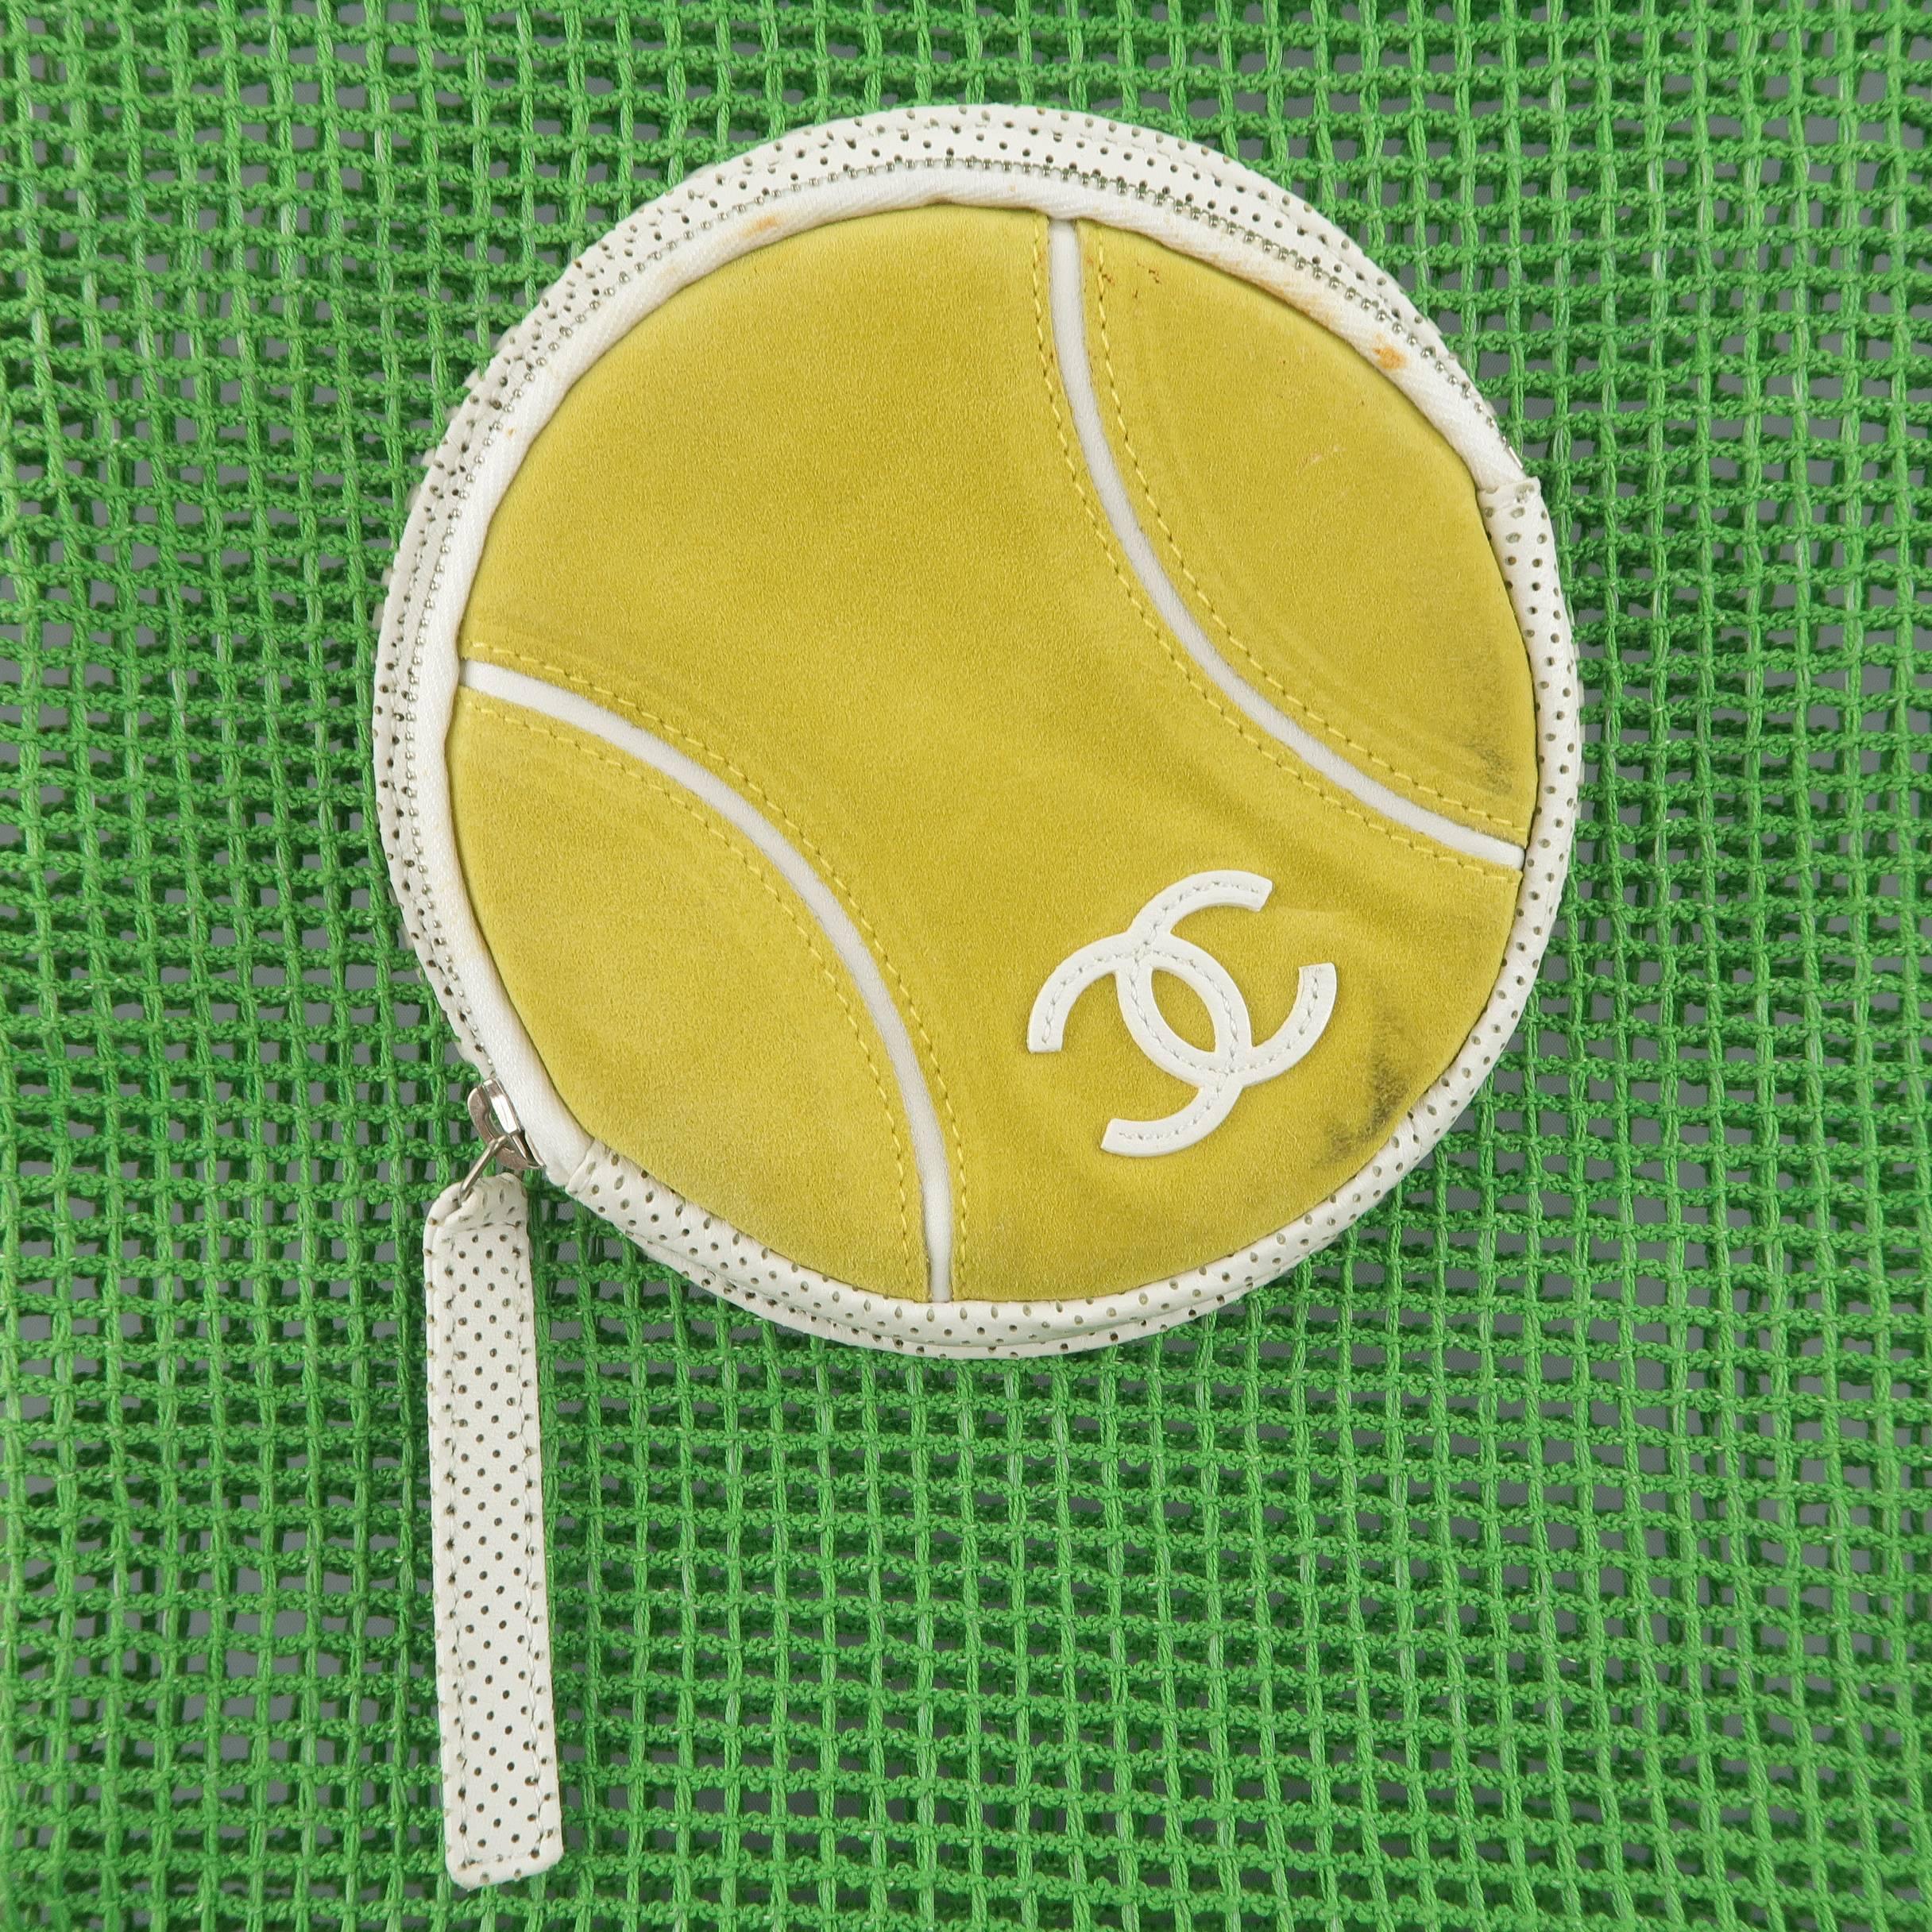 This rare vintage CHANEL tote bag comes in kelly green fishnet mesh with white perforated trim and features skinny double top handles, a snap top closure, and yellow suede CC tennis ball zip pocket front. Discolorations throughout from glue aging